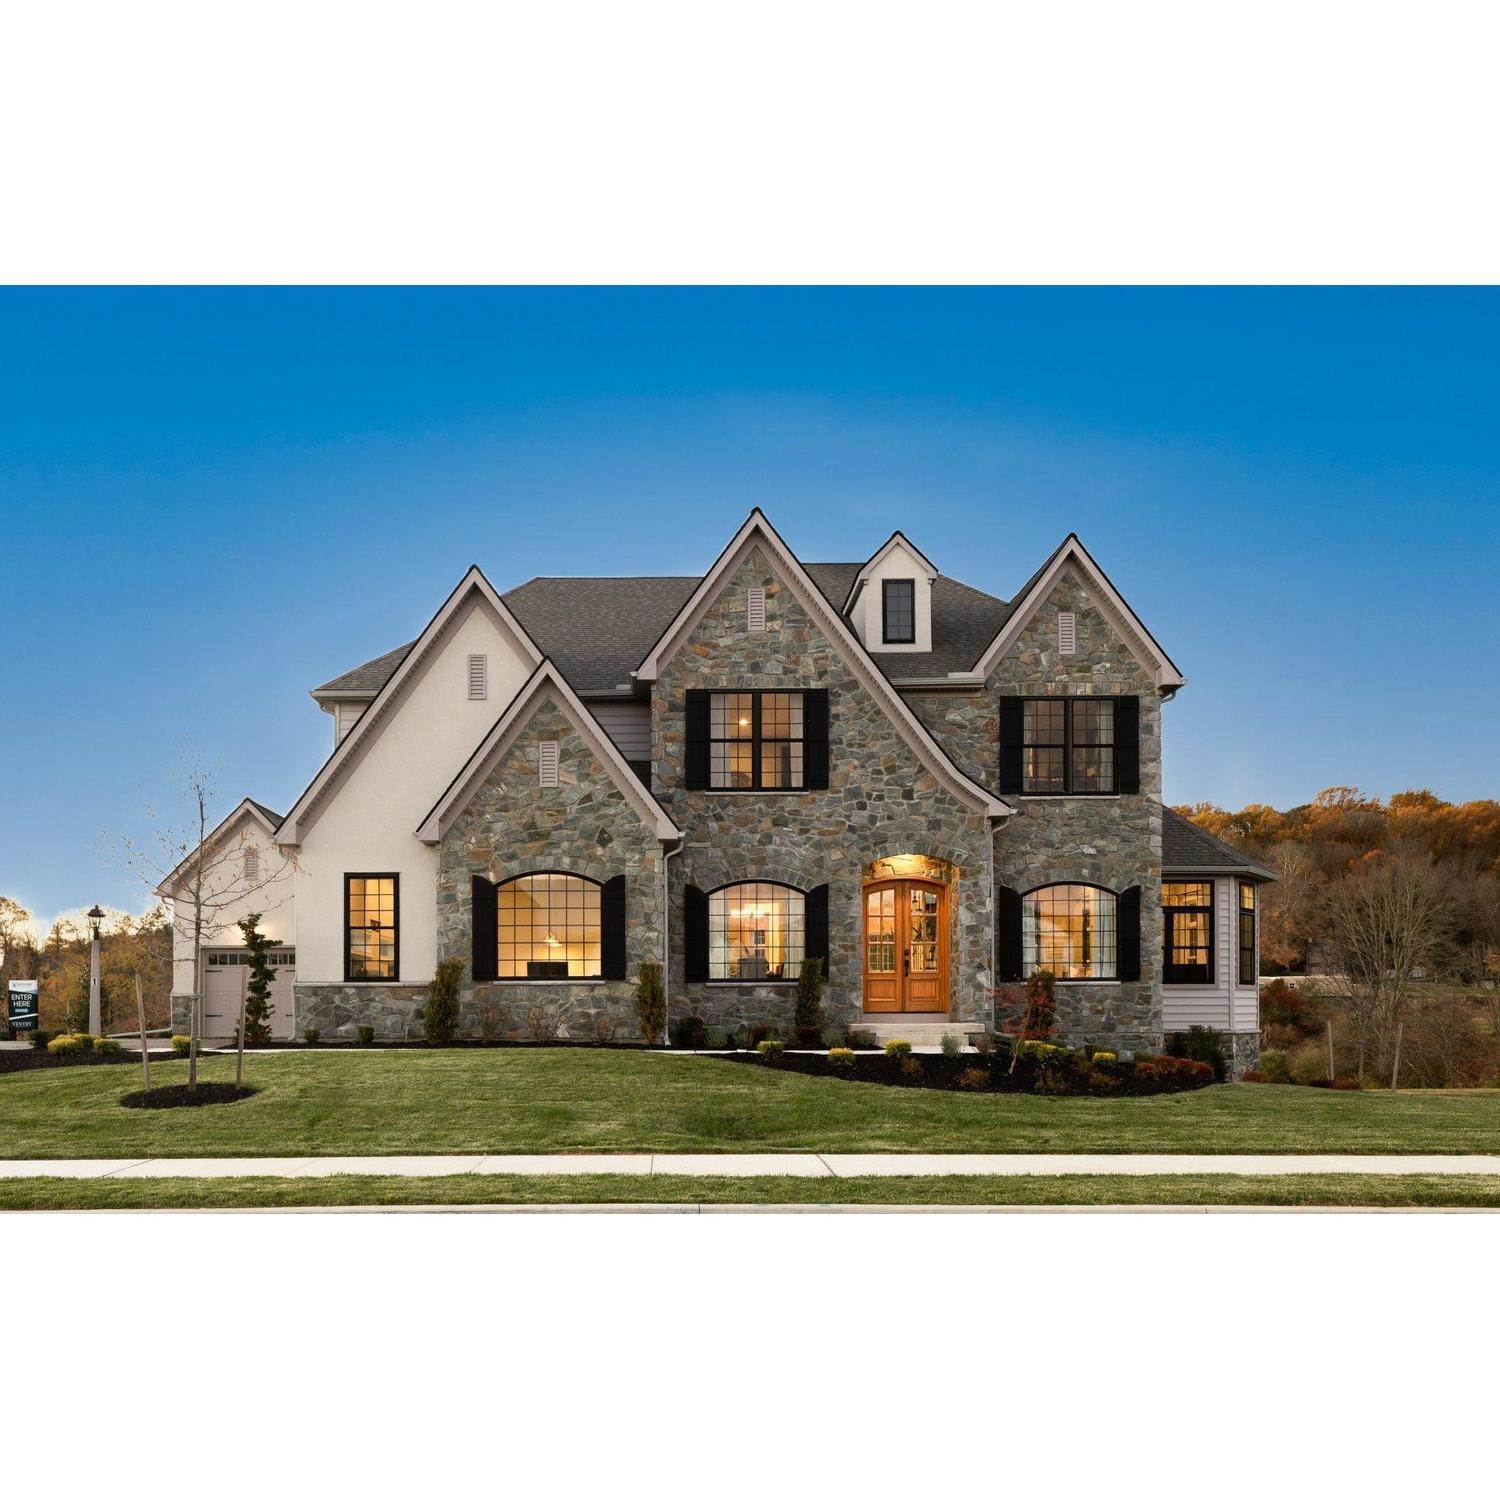 46. Ventry at Edgmont Preserve建於 101 Parkview Way, Newtown Square, PA 19073